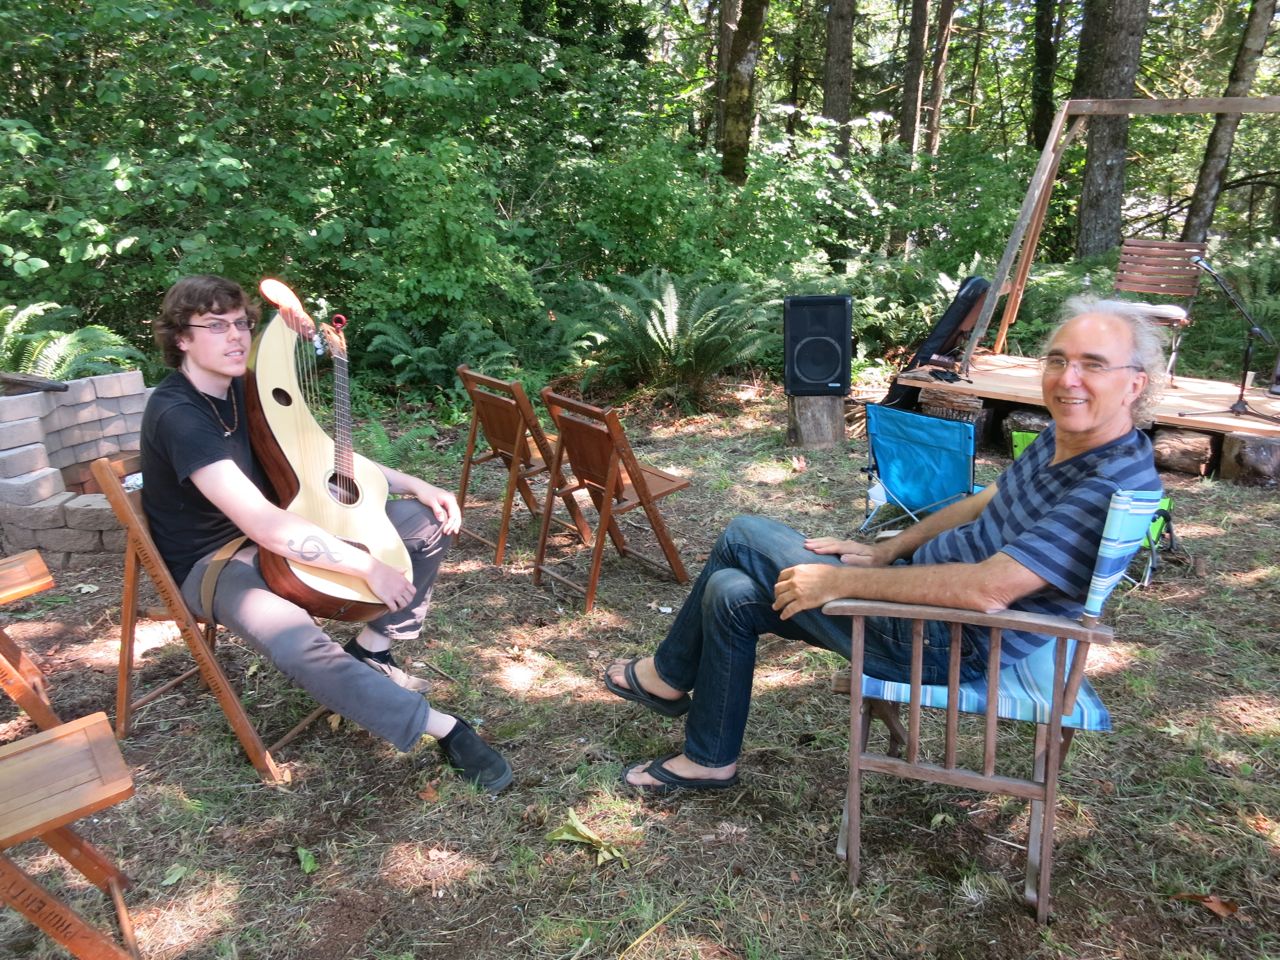 John gives a private lesson to Adrian in the woods with the harp guitar.